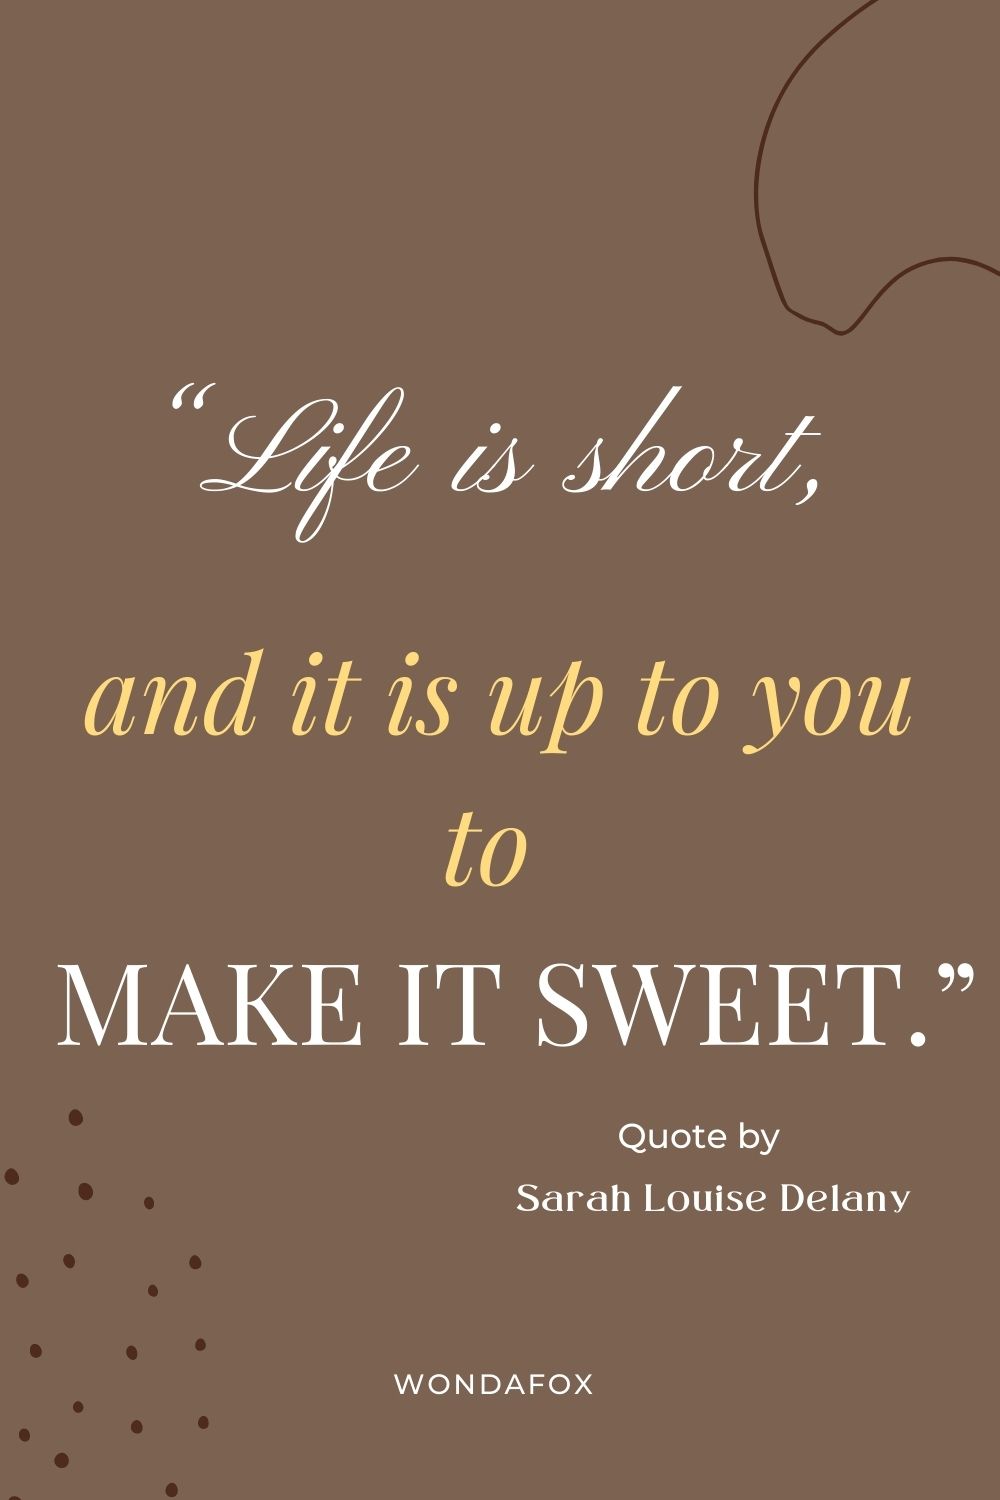 “Life is short, and it is up to you to make it sweet.”
Sarah Louise Delany